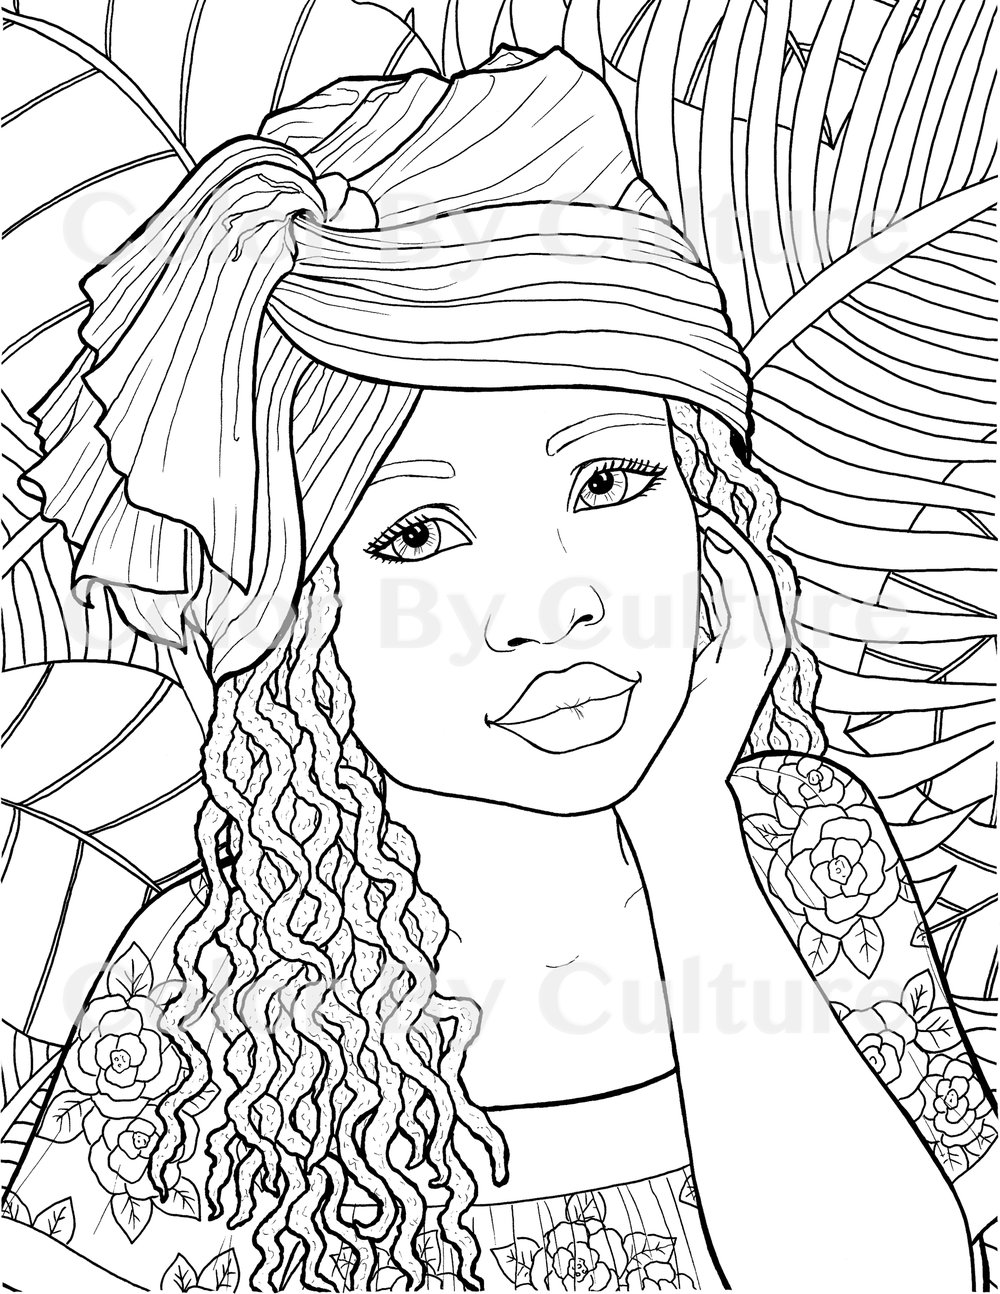 Coloring book for Women: An Adult Coloring Book for Black Women, an African  American coloring book, african american coloring books for adults